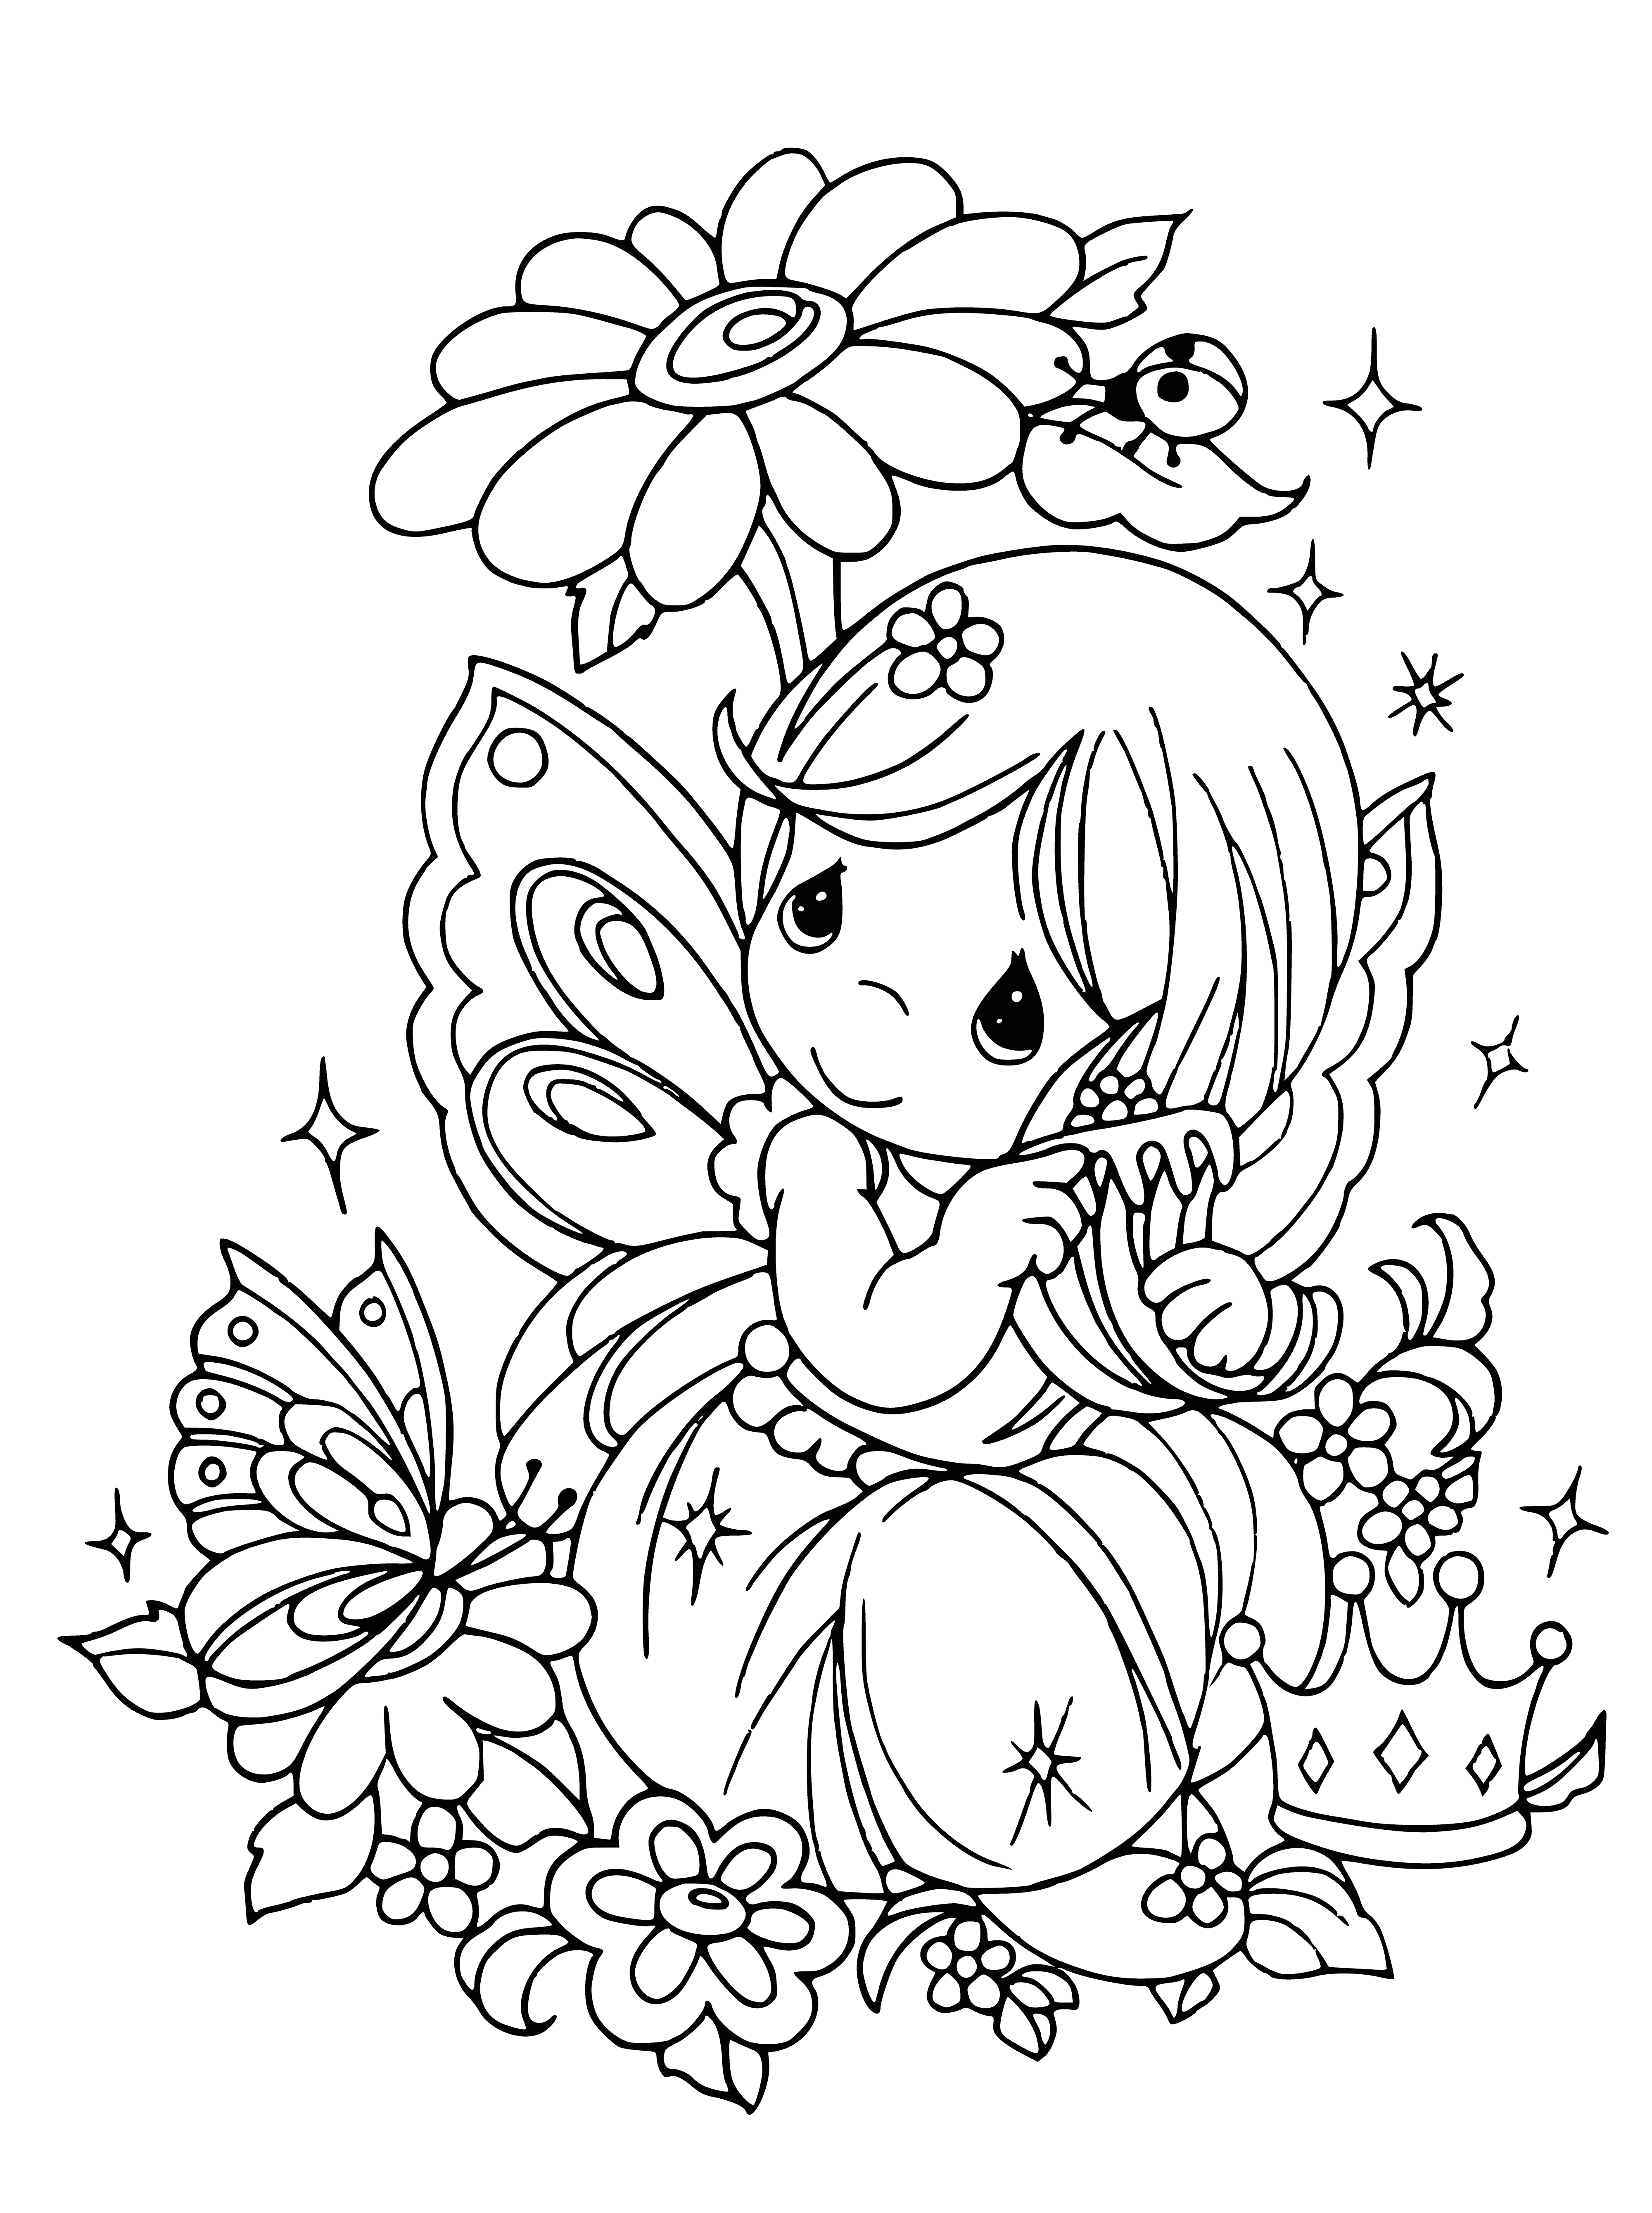 coloring page: Elves & fairies on a coloring page: small creatures with wings wearing green/pink & purple.